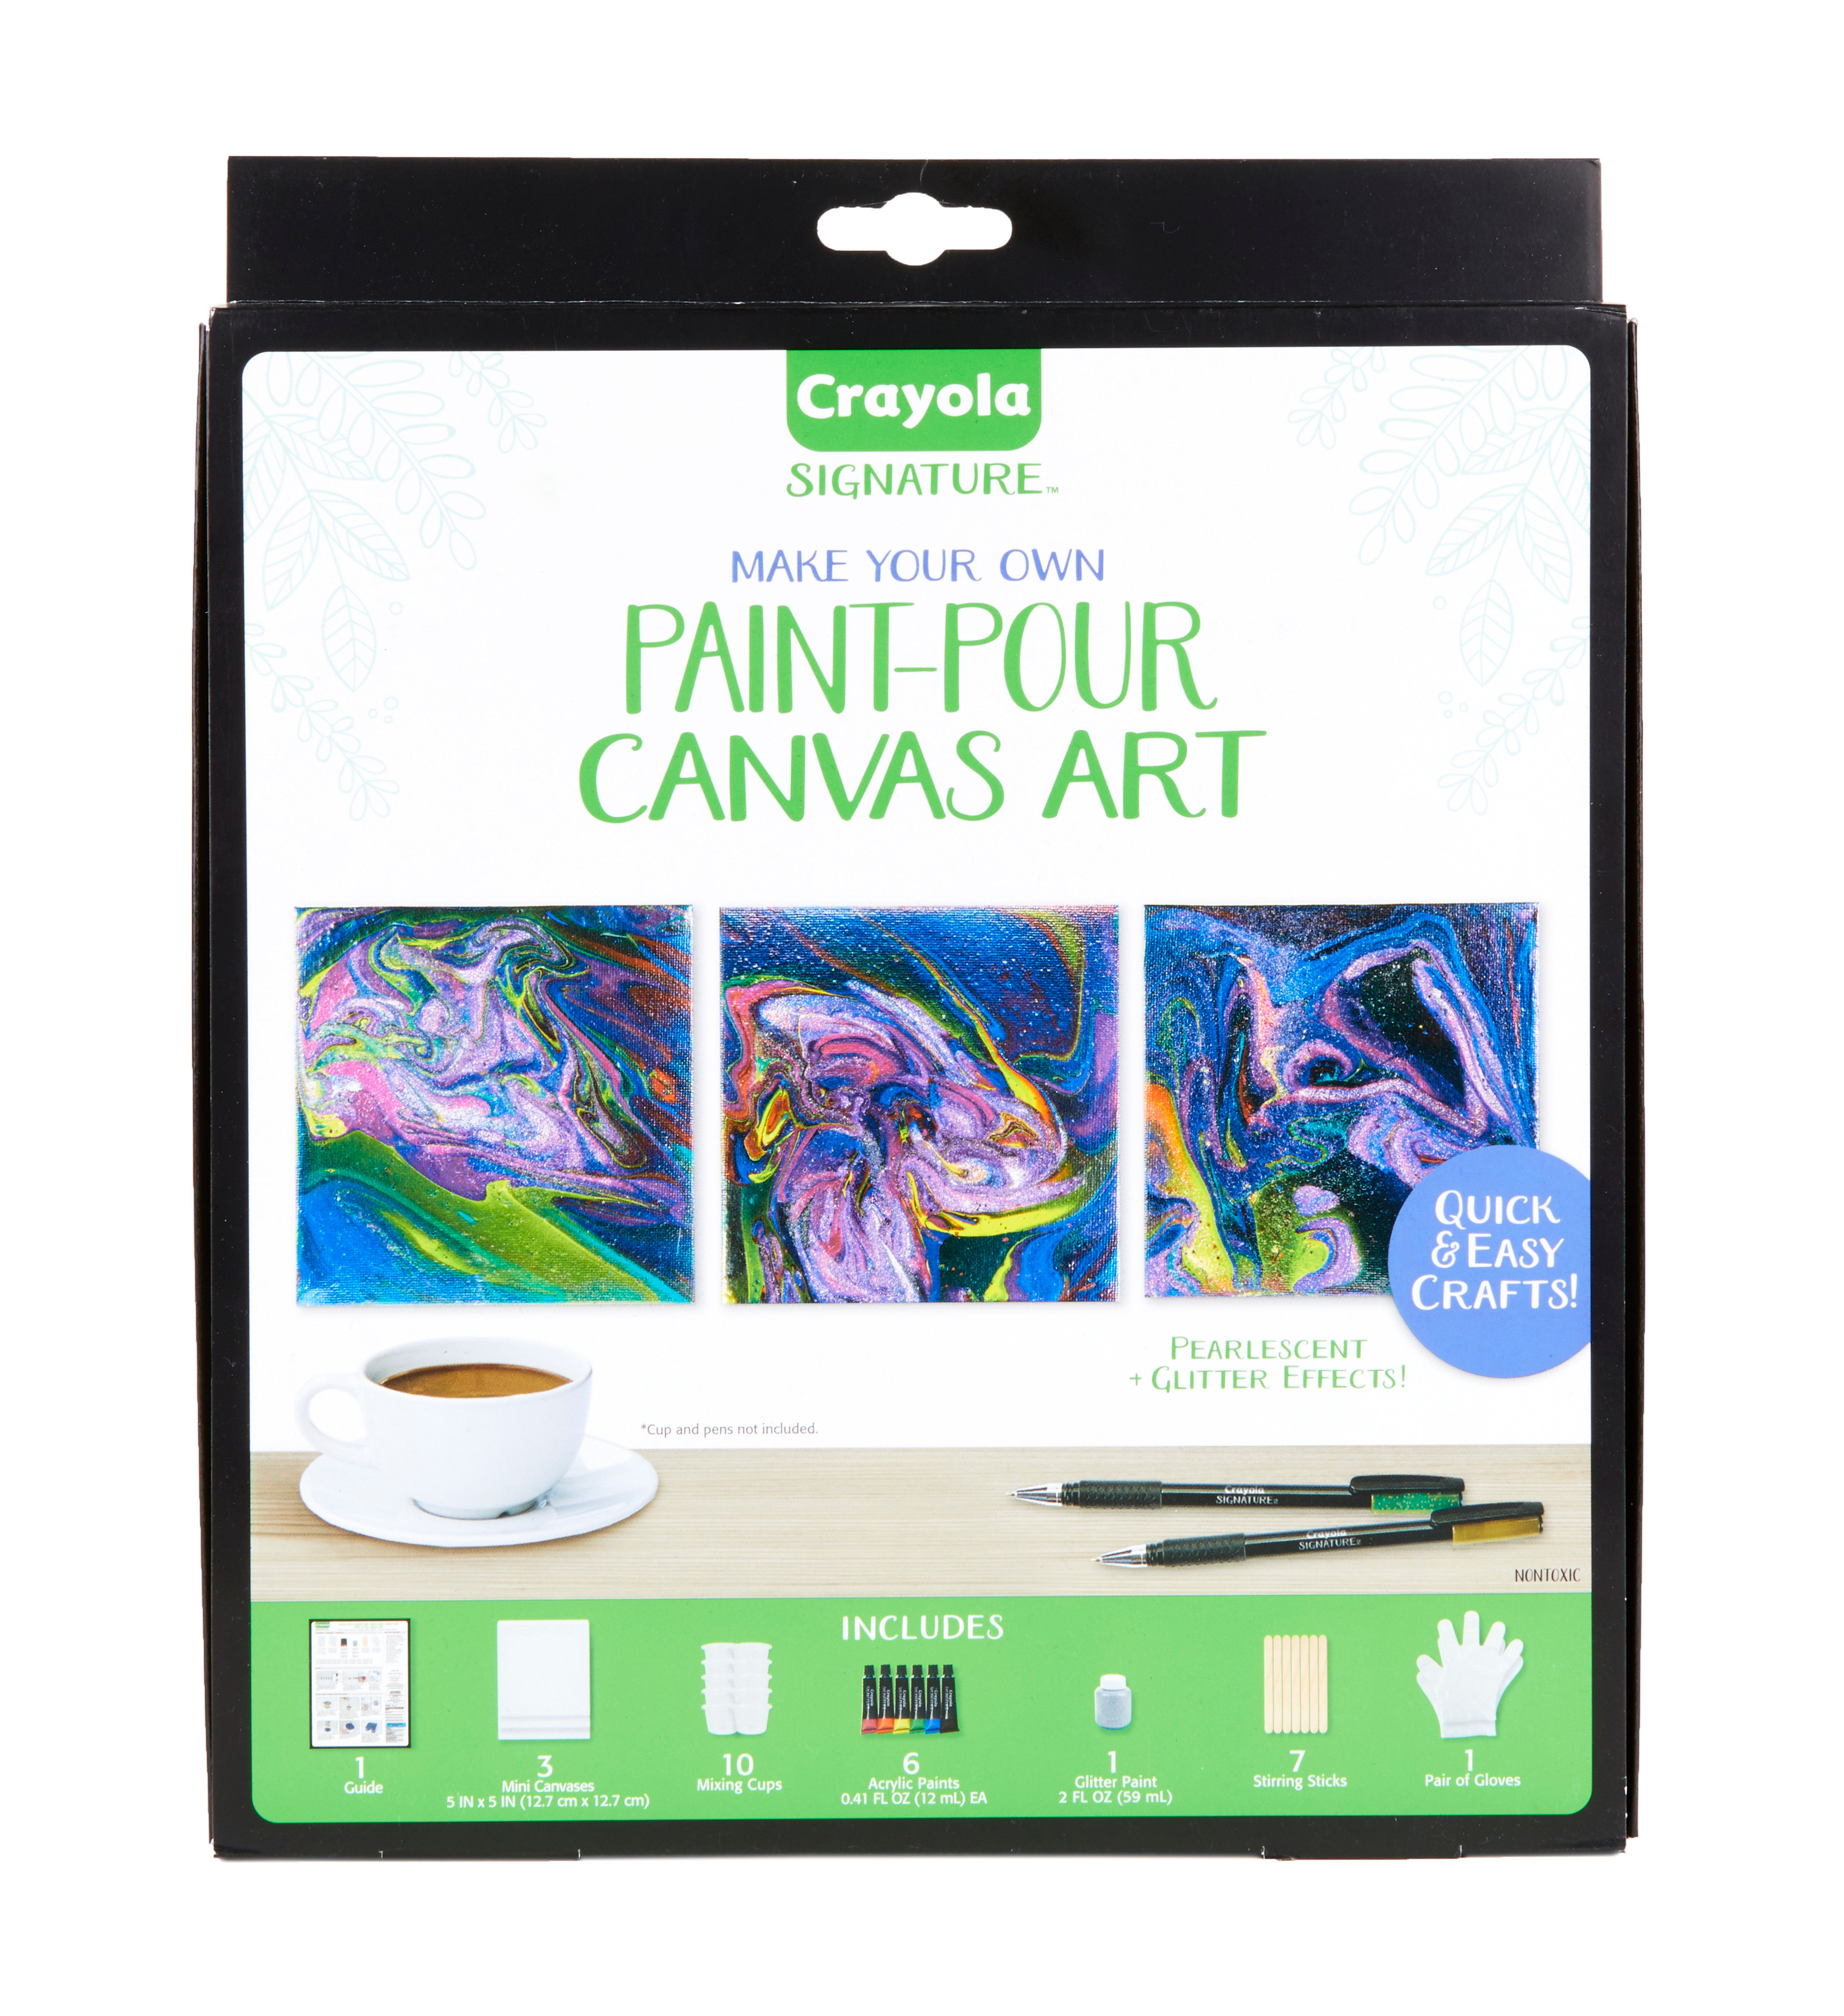 Crayola Mini Canvas Painting Kit, DIY Gifts for Crafters, Arts & Crafts for Teens, 14pcs, Adult - image 5 of 13